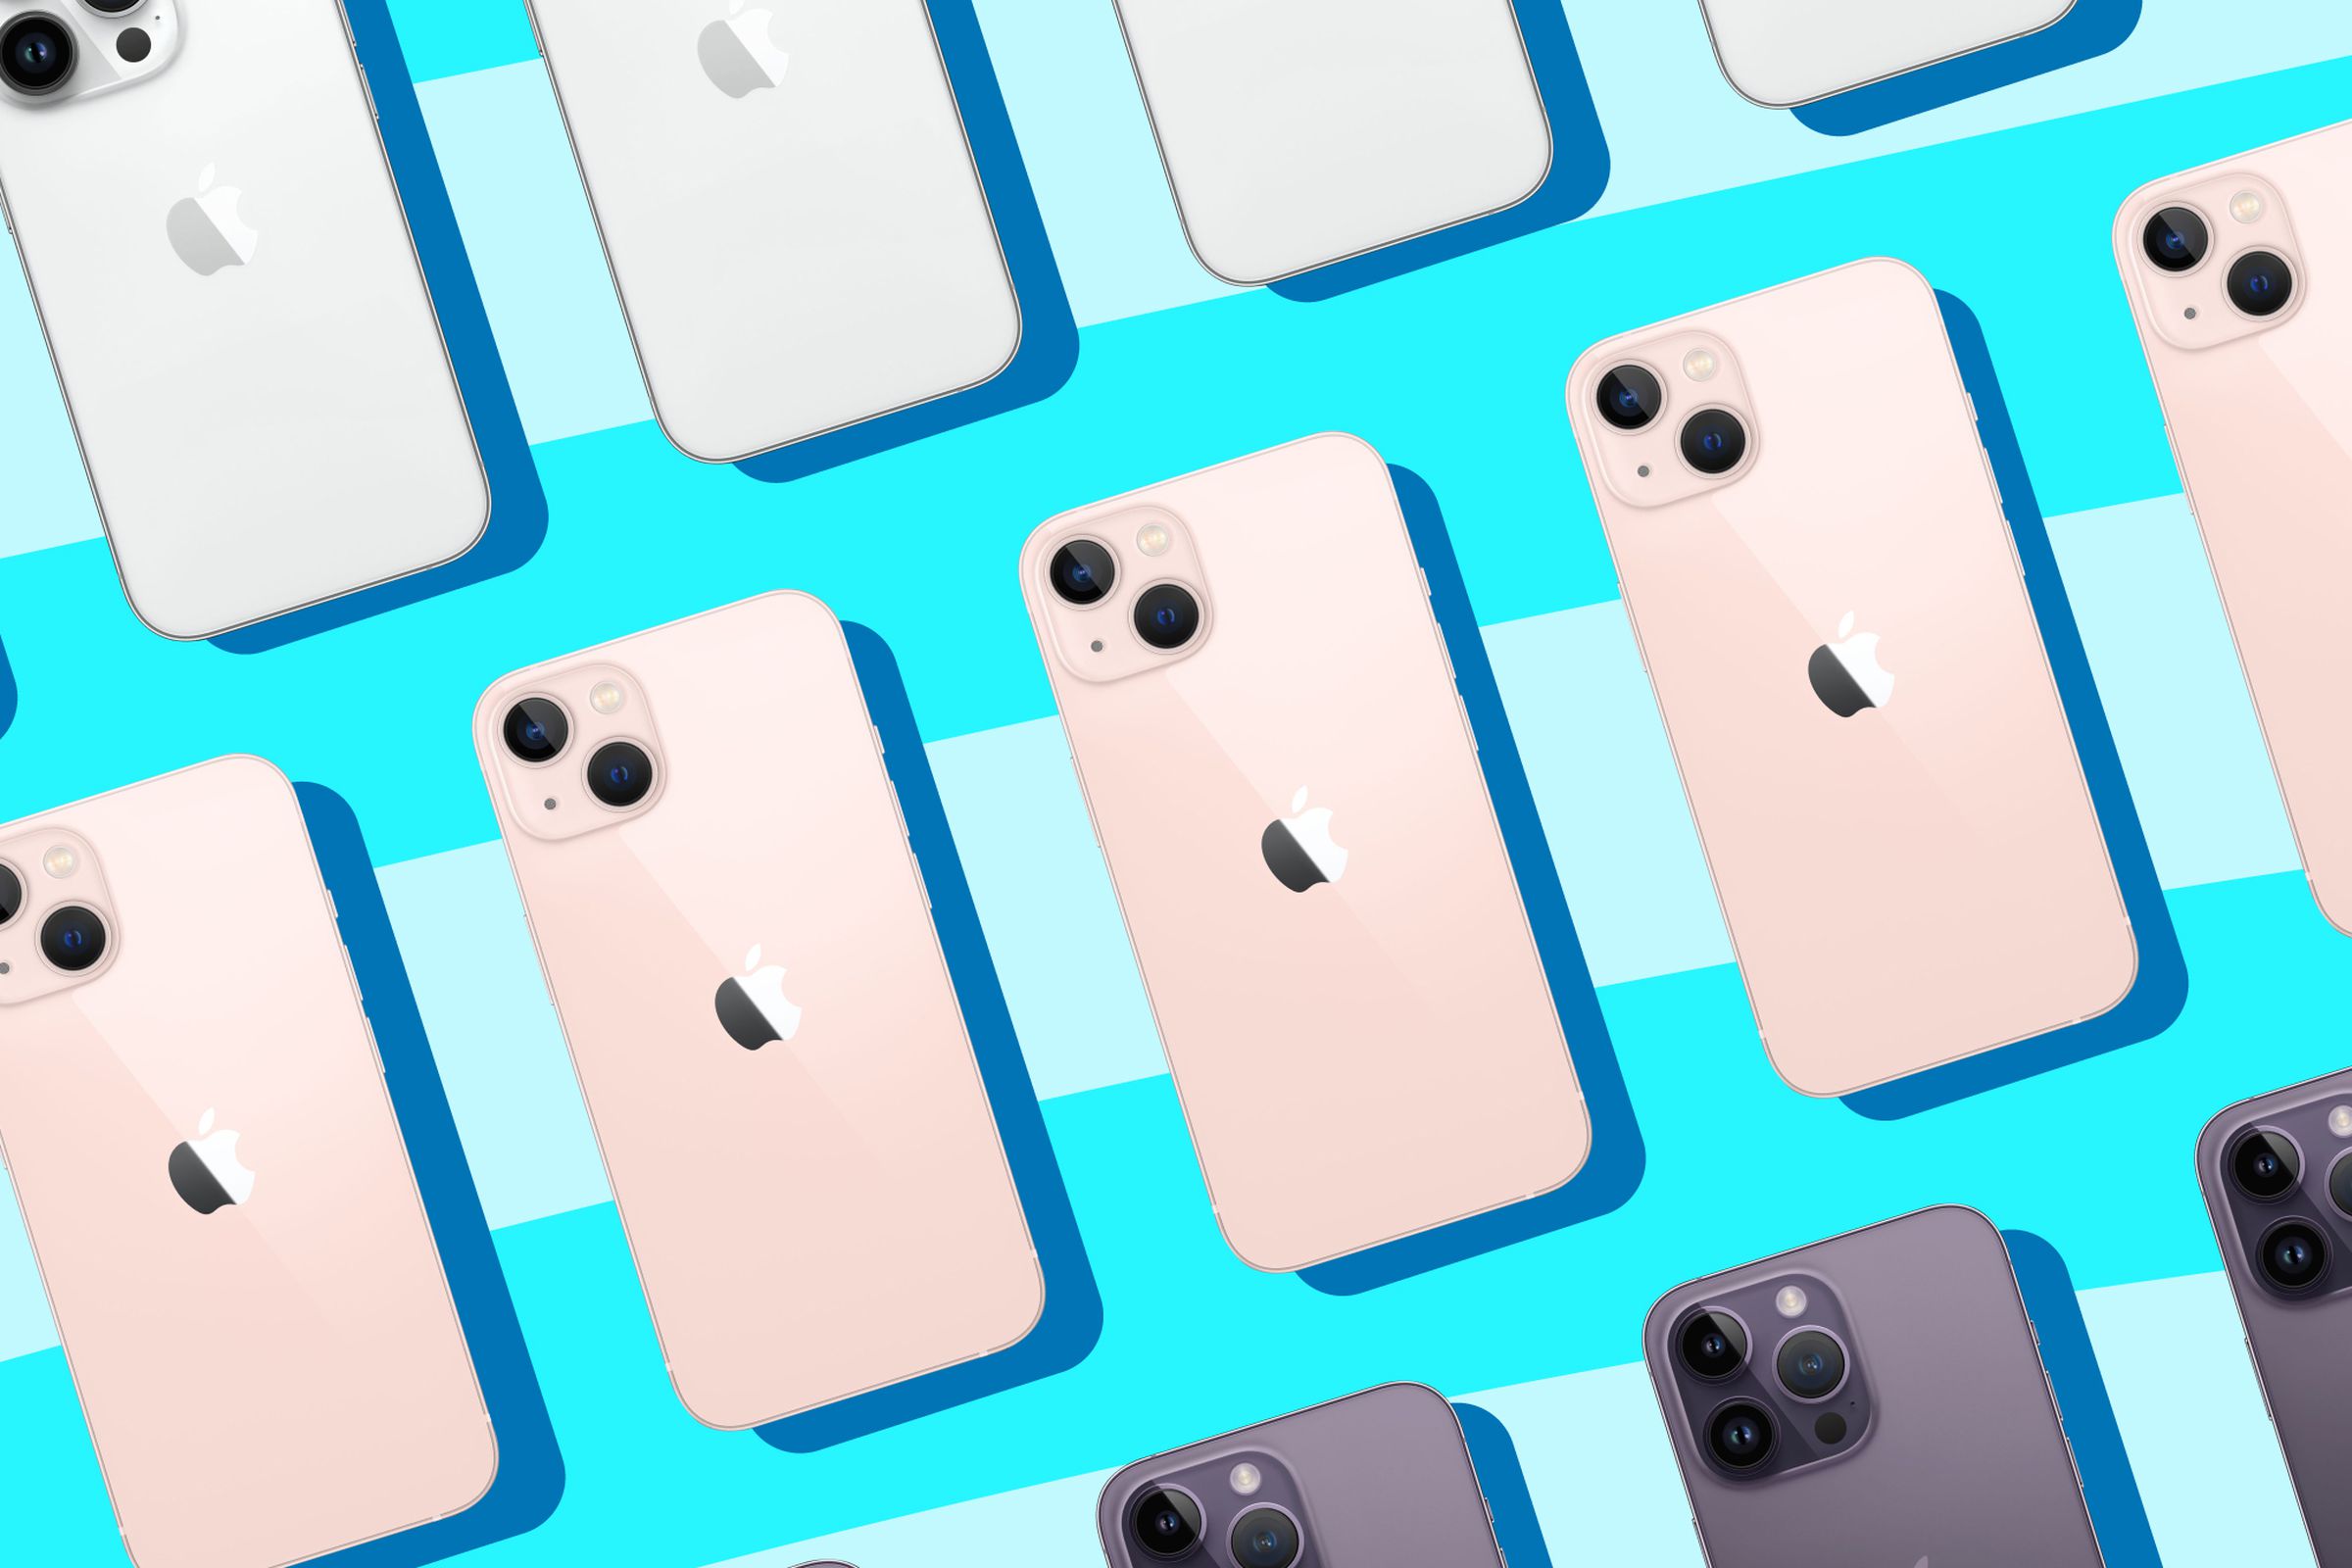 Illustration showing iPhones on a light blue striped background.